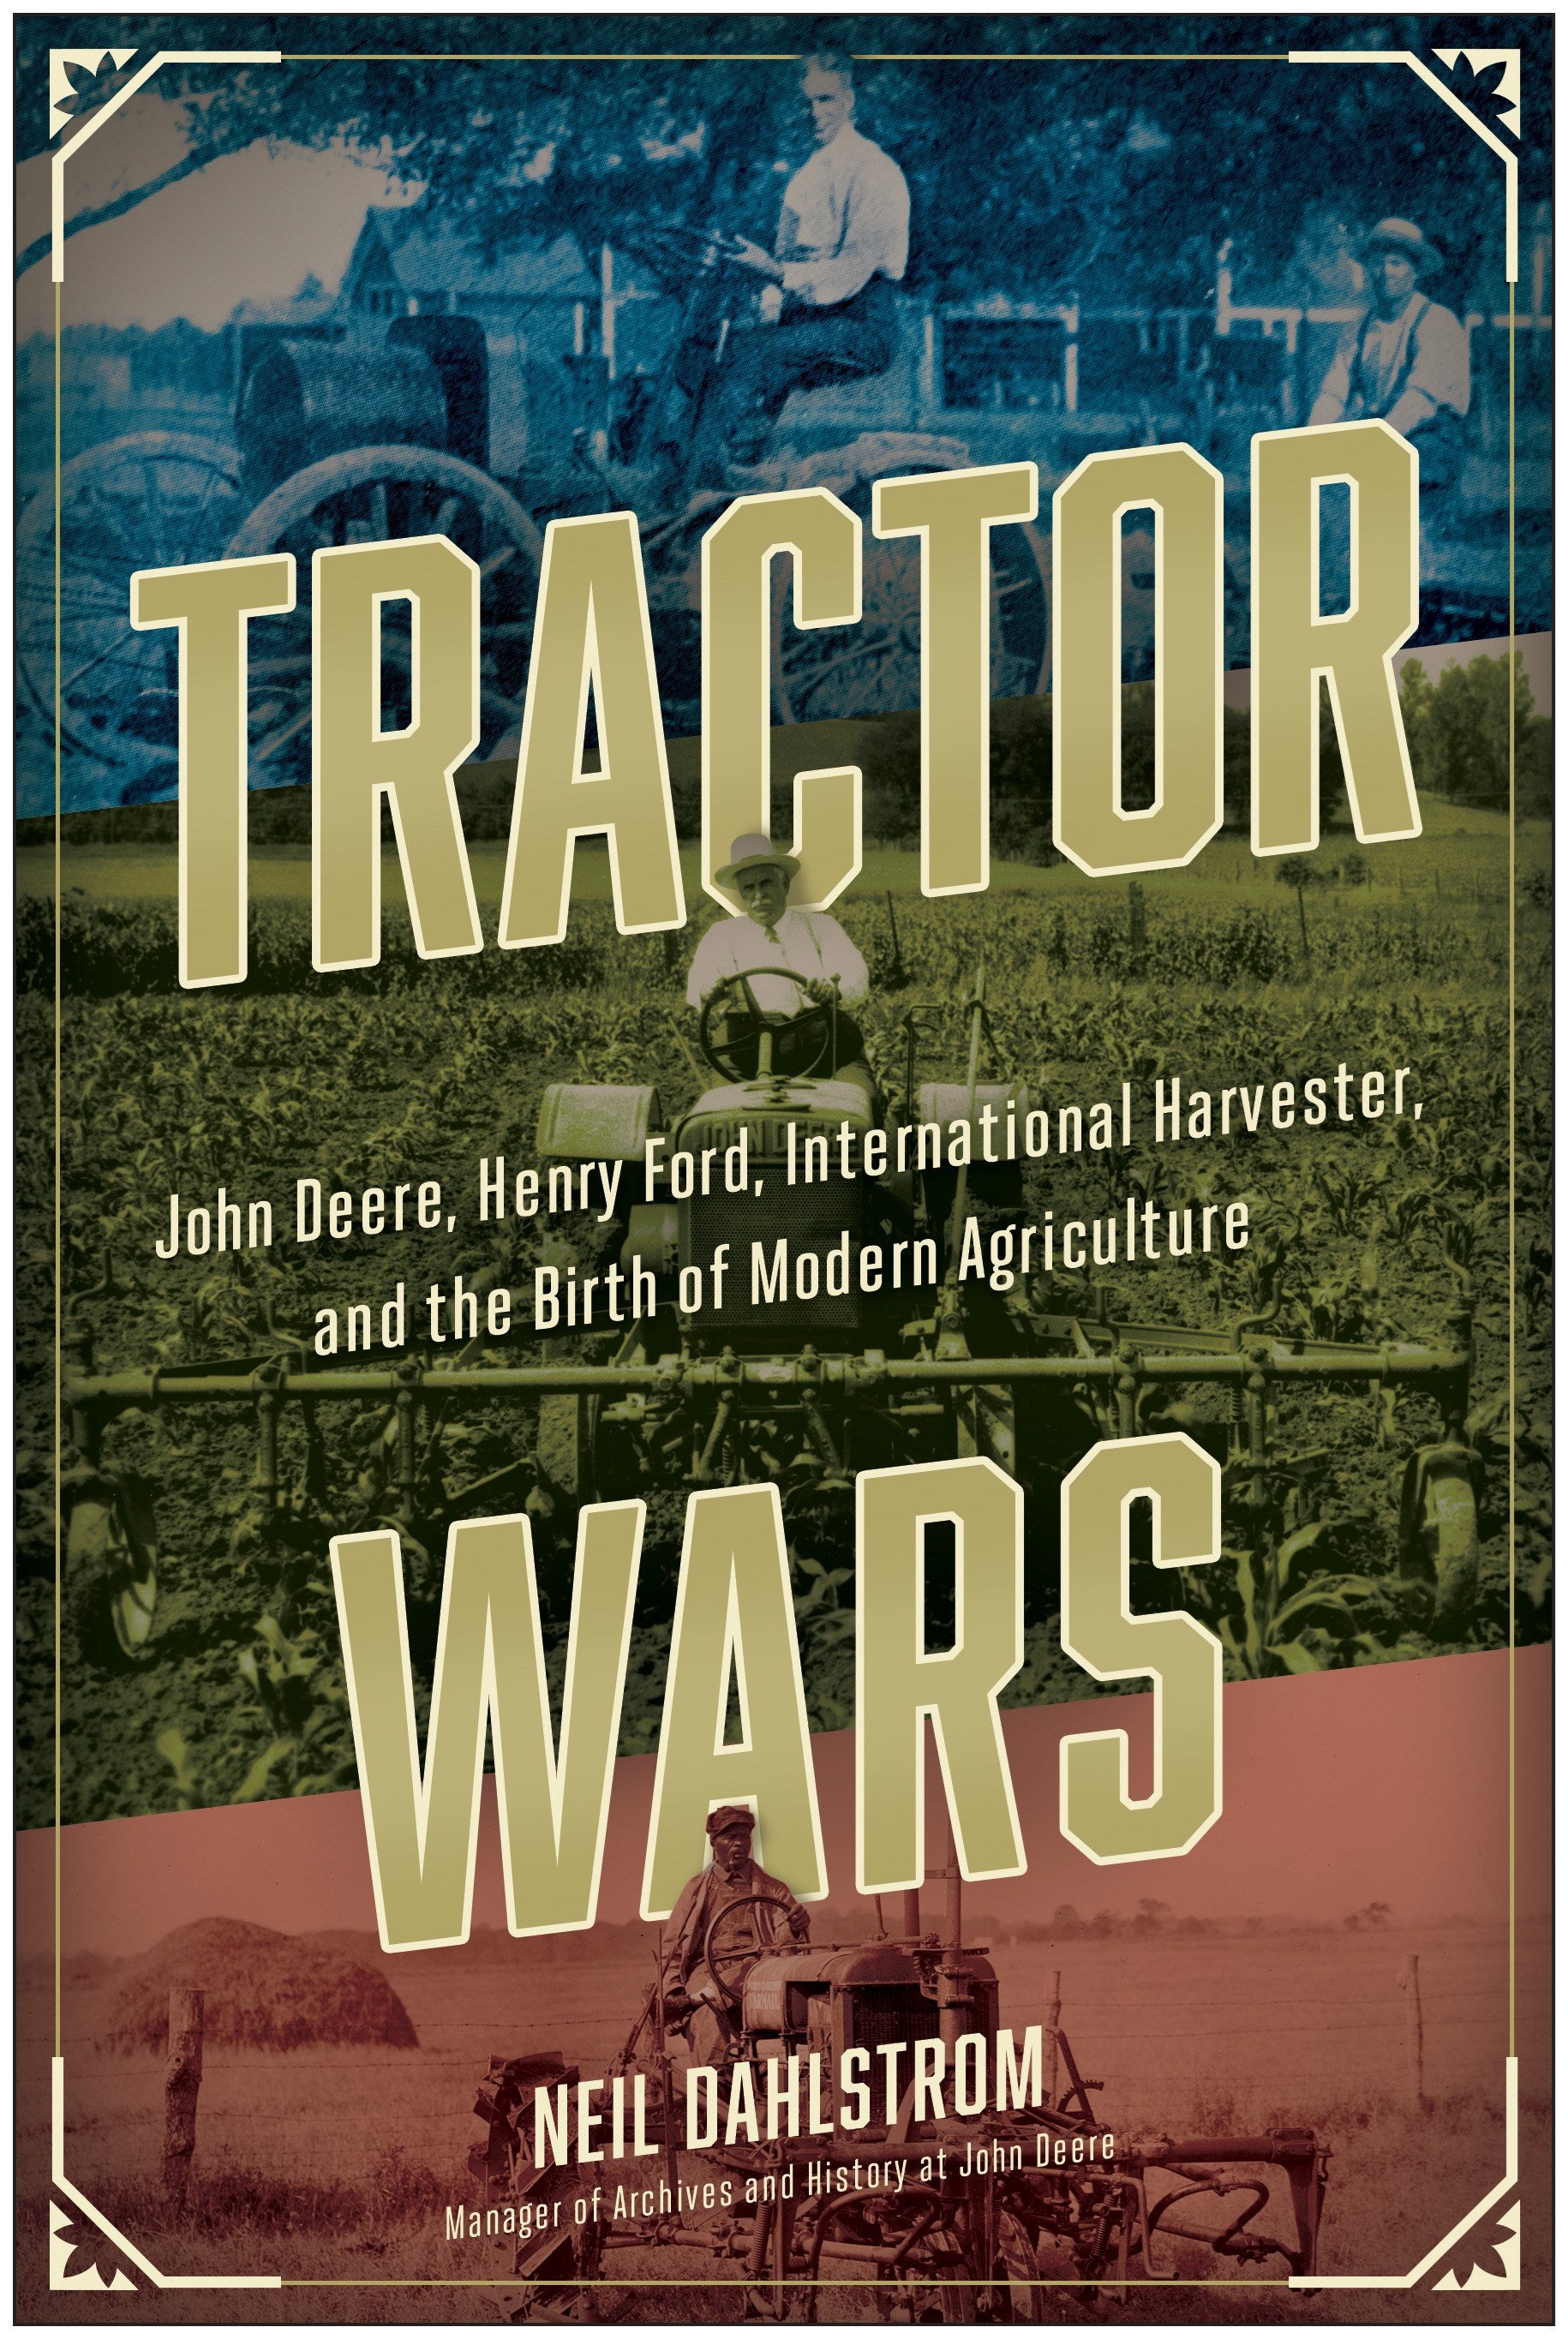 Tractor Wars: John Deere, Henry Ford, International Harvester, and the Birth of Modern Agricul ture